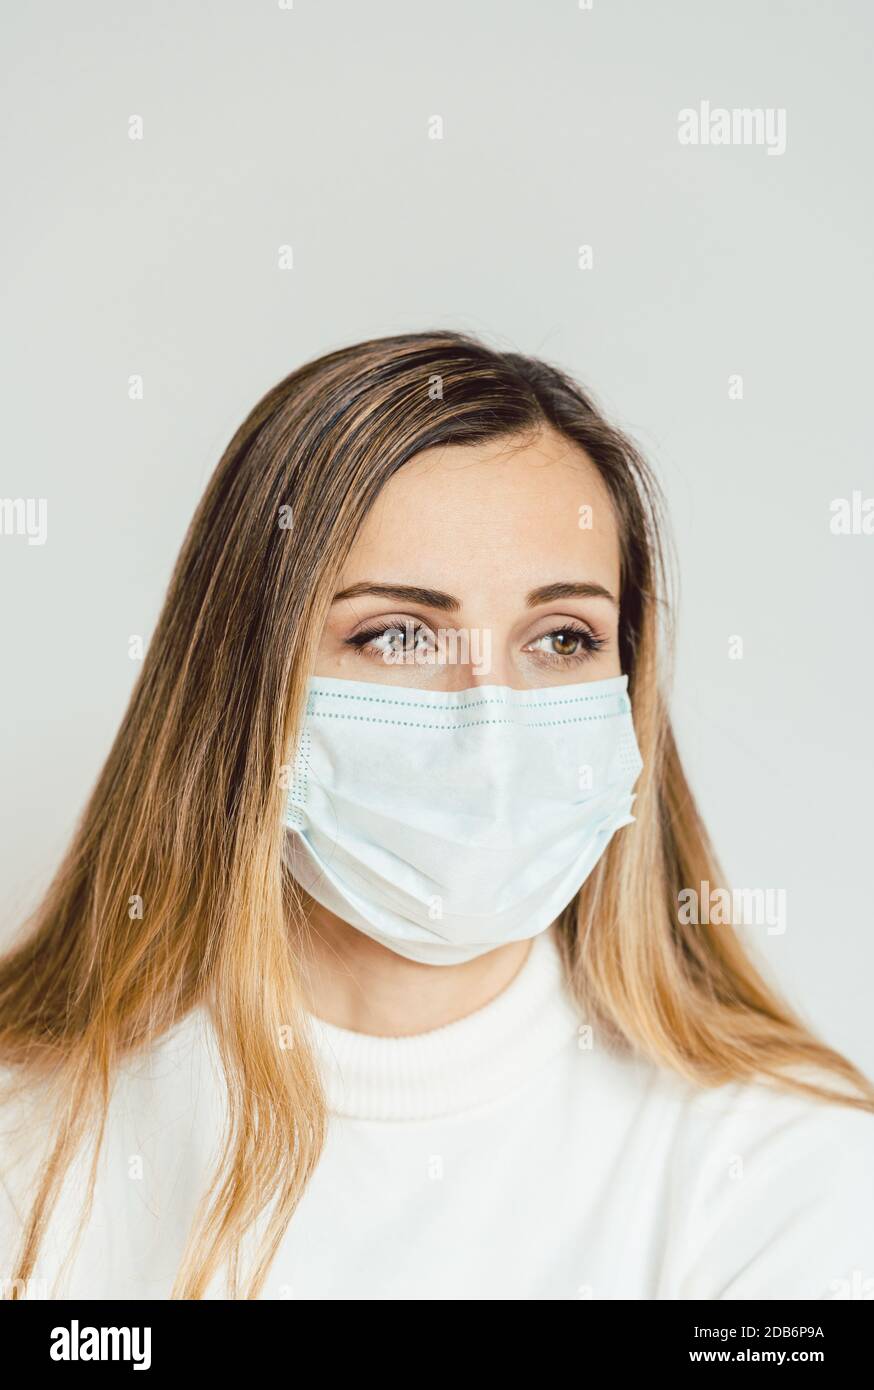 Anxious woman with face mask worried about the Covid-19 outbreak staying at home Stock Photo